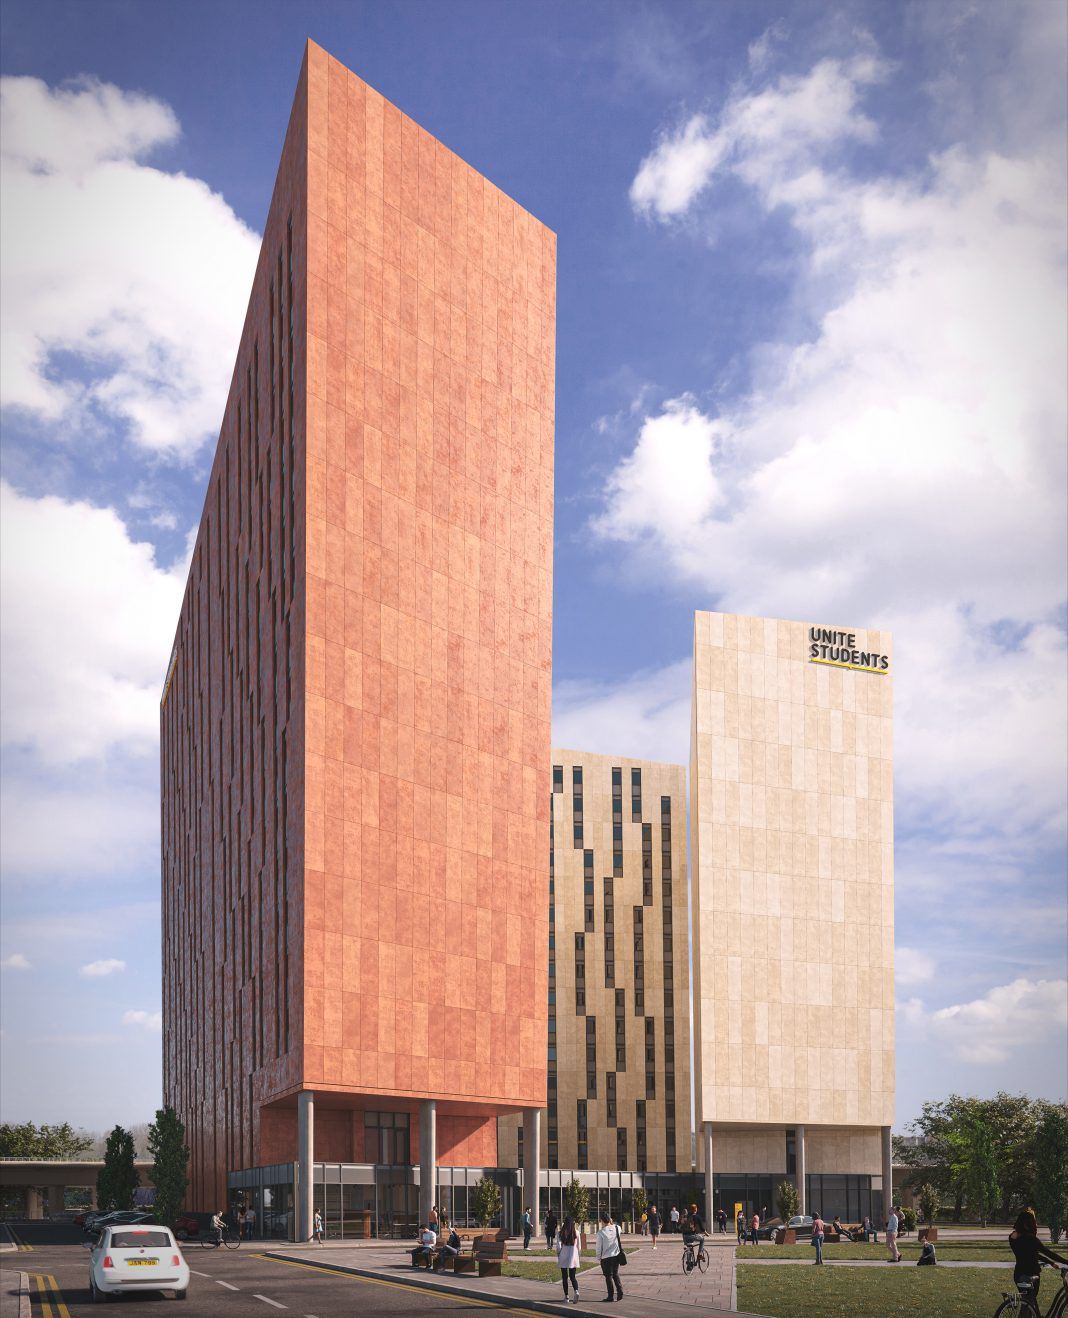 New Unite Students Accommodation in Manchester Announced